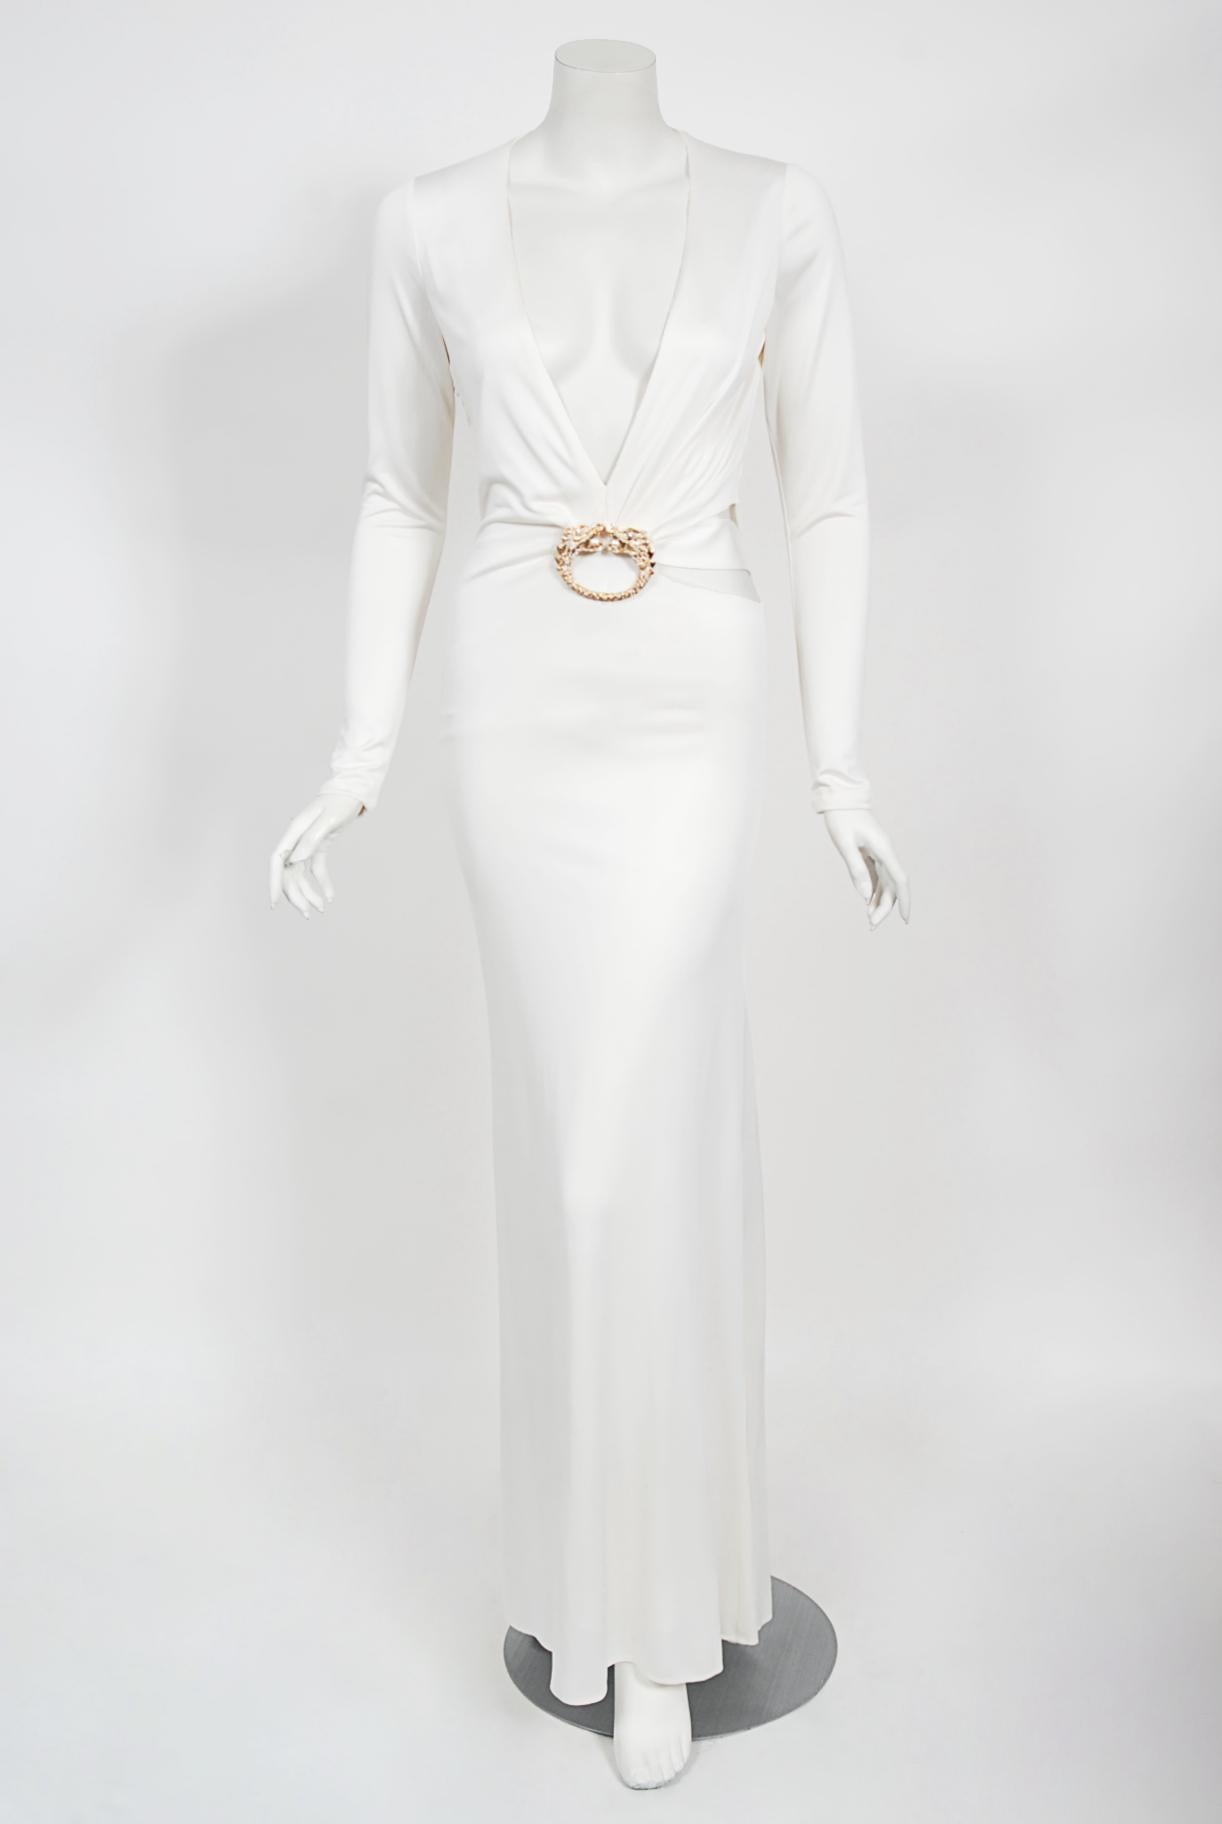 Vintage 2004 Gucci by Tom Ford Rare White Silk-Jersey Plunge Cut Out Finale Gown 9